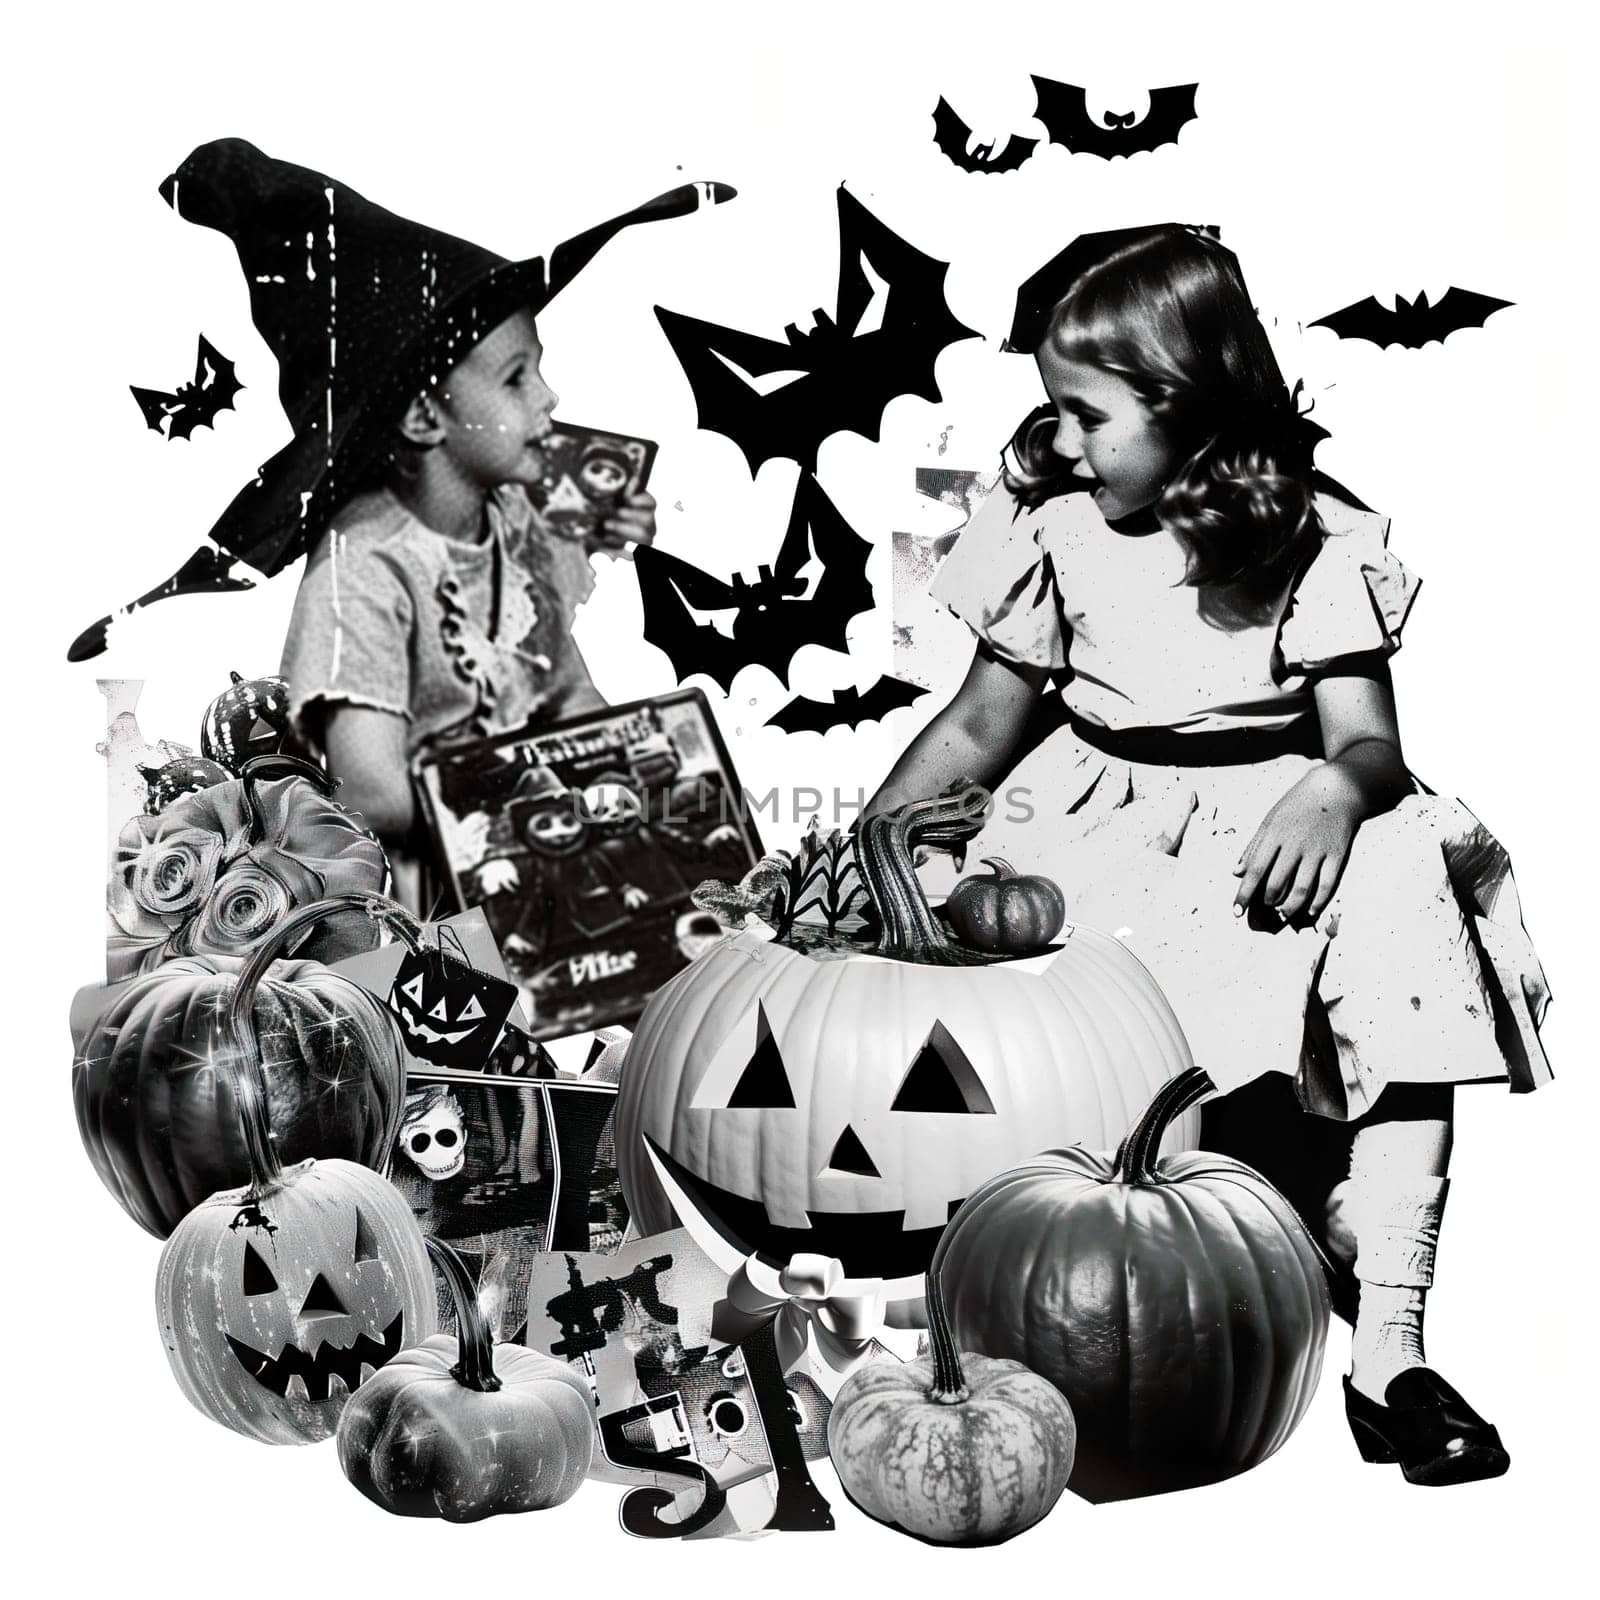 Monochrome vintage photo of halloween childs with pumpkins cut out image by Dustick